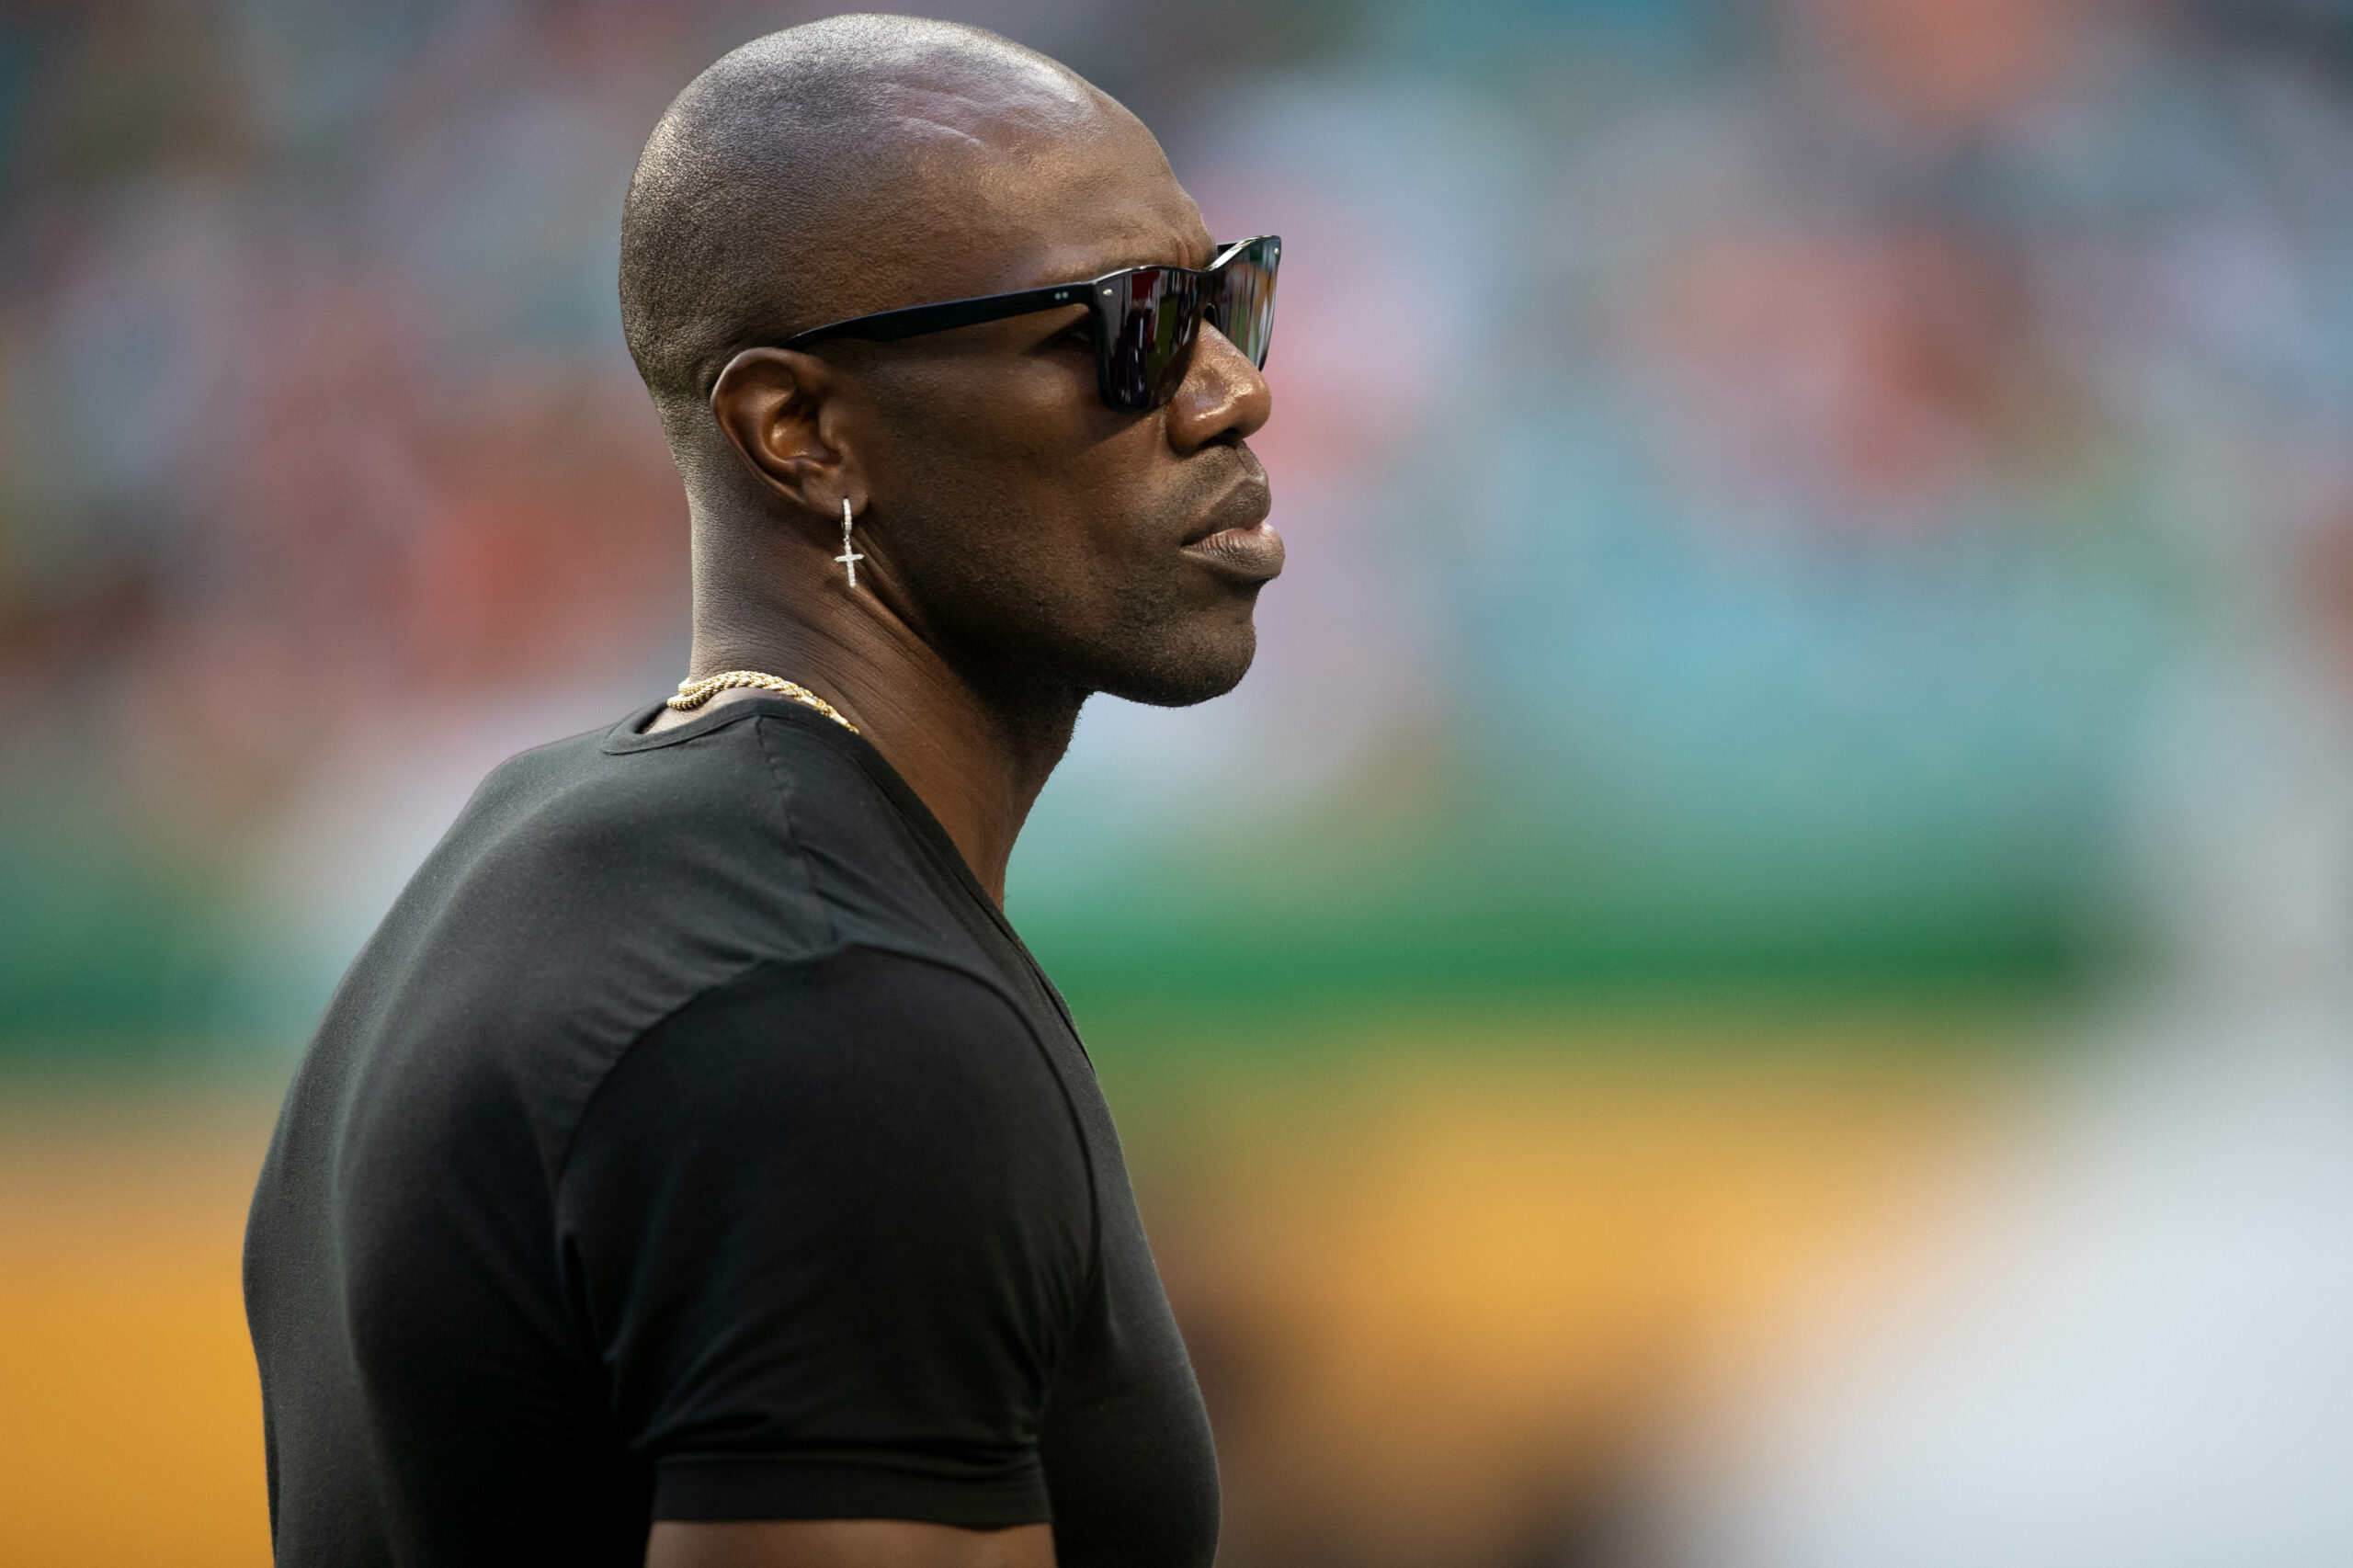 Terrell Owens blisters sub-4.5 40 at 48 years old